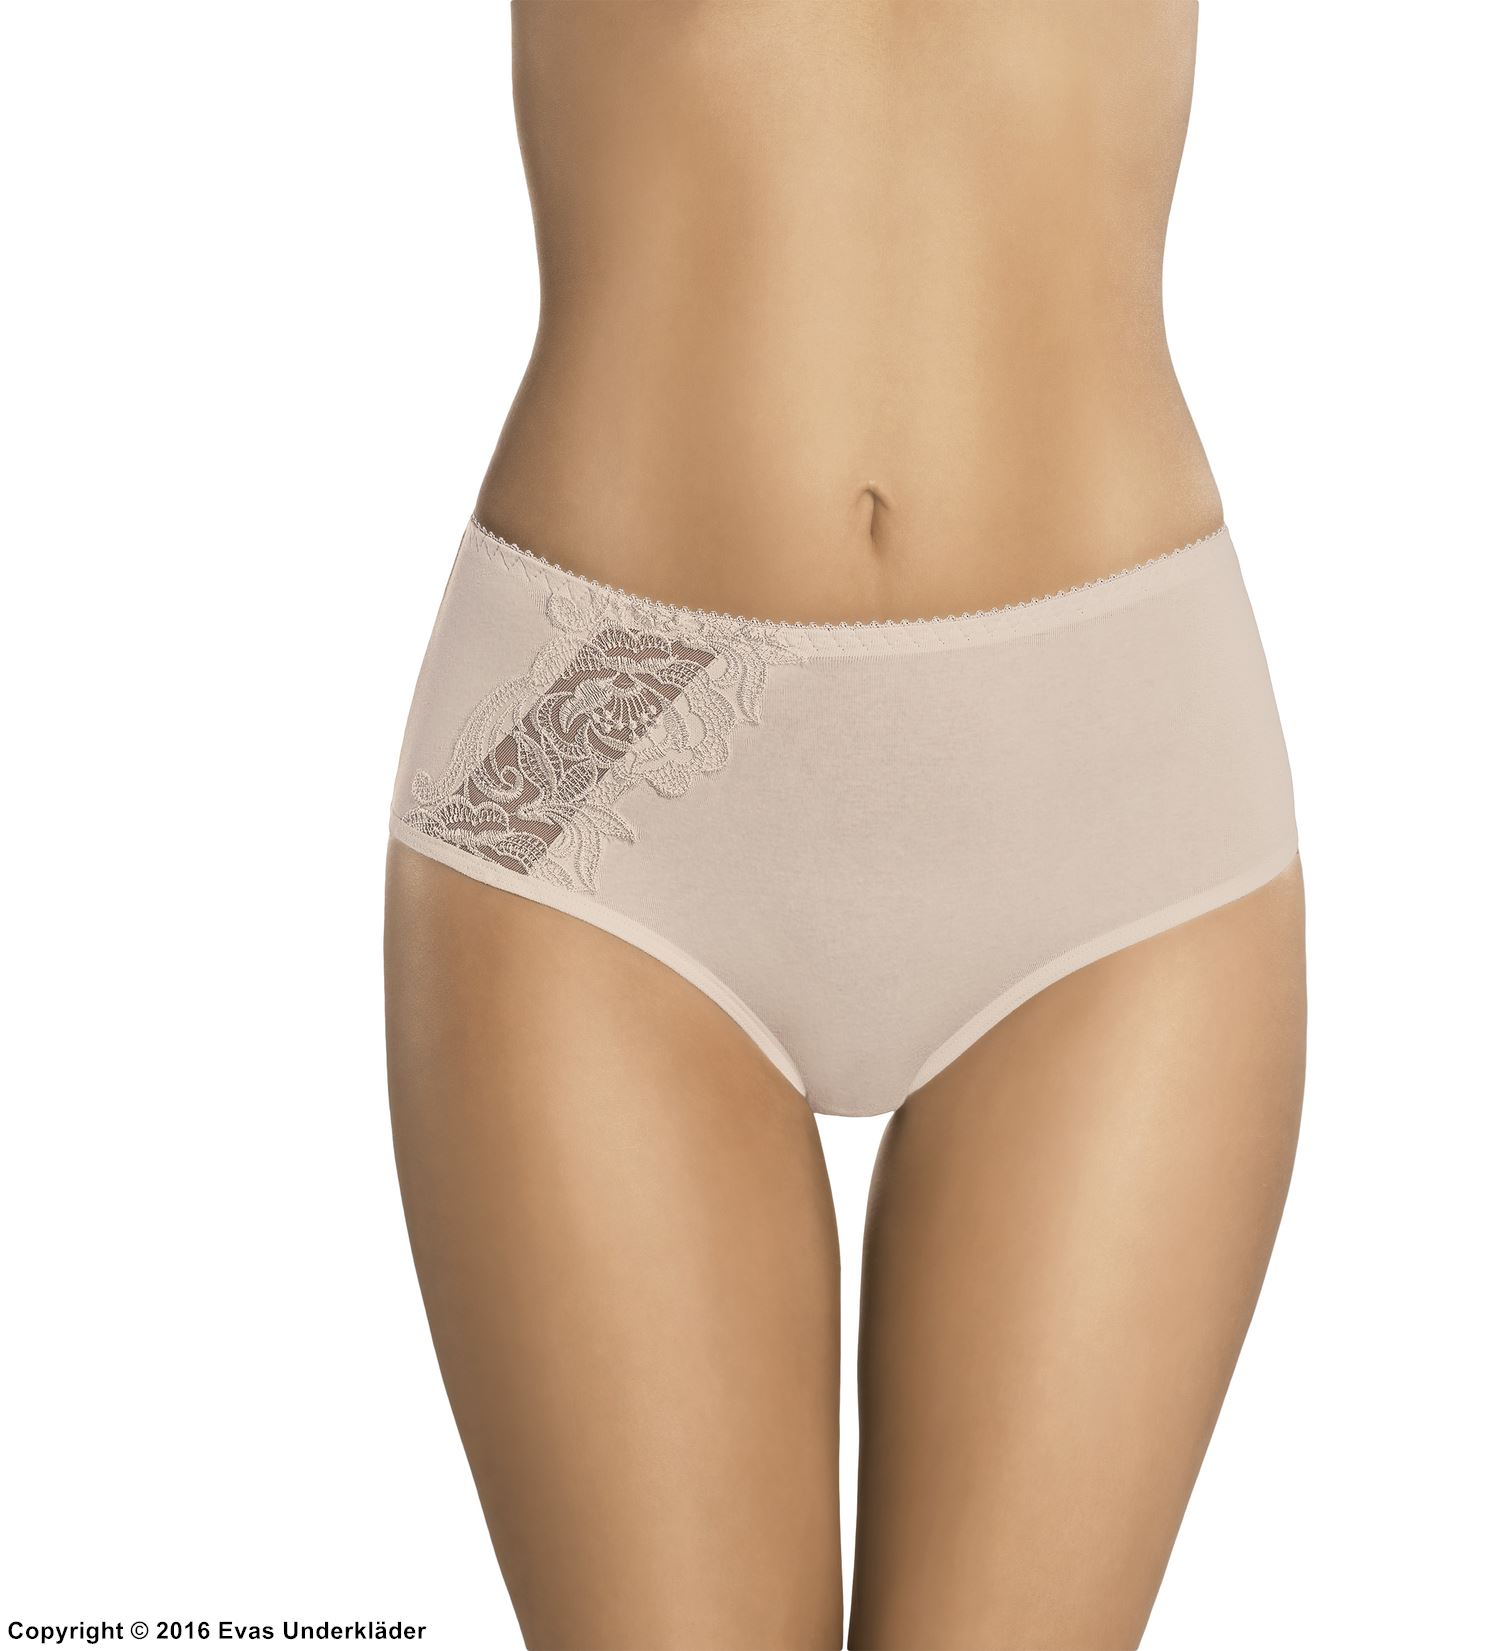 Classic briefs, high quality cotton, lace embroidery